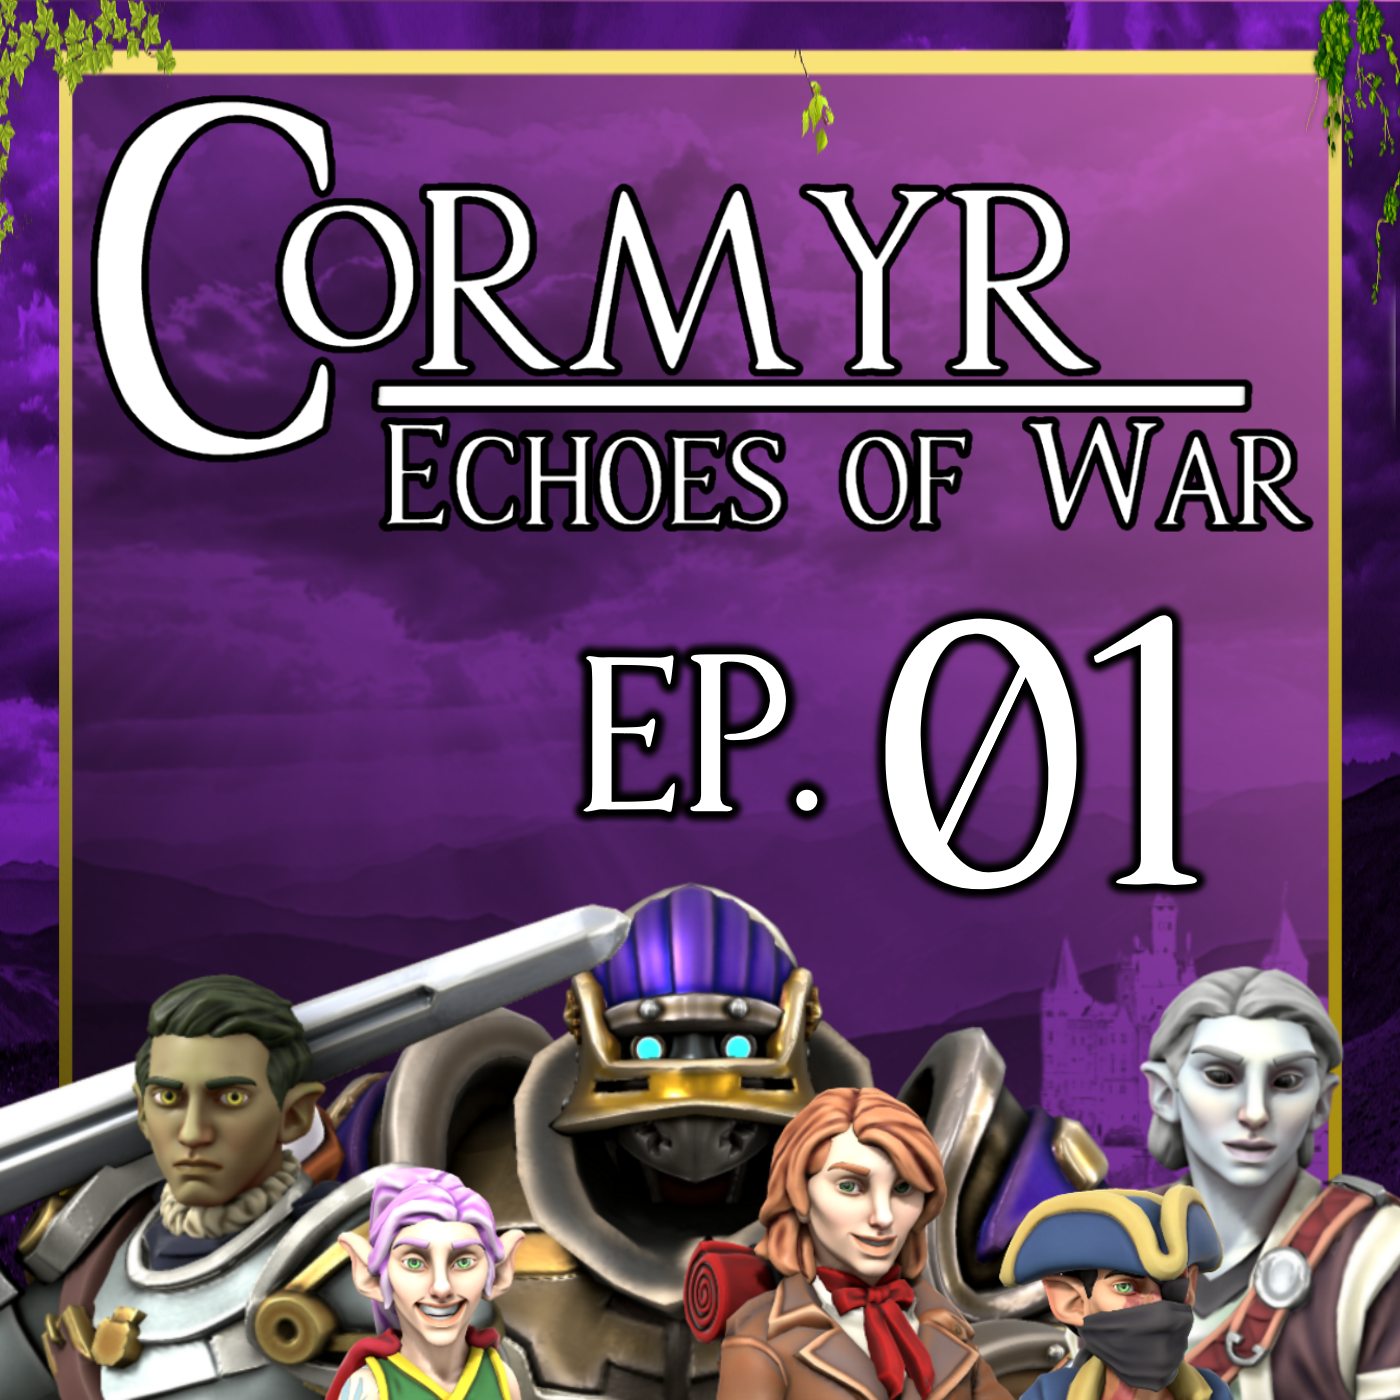 Cormyr: Echoes of War - Ep. 1 - Welcome to Warhounds Ltd.